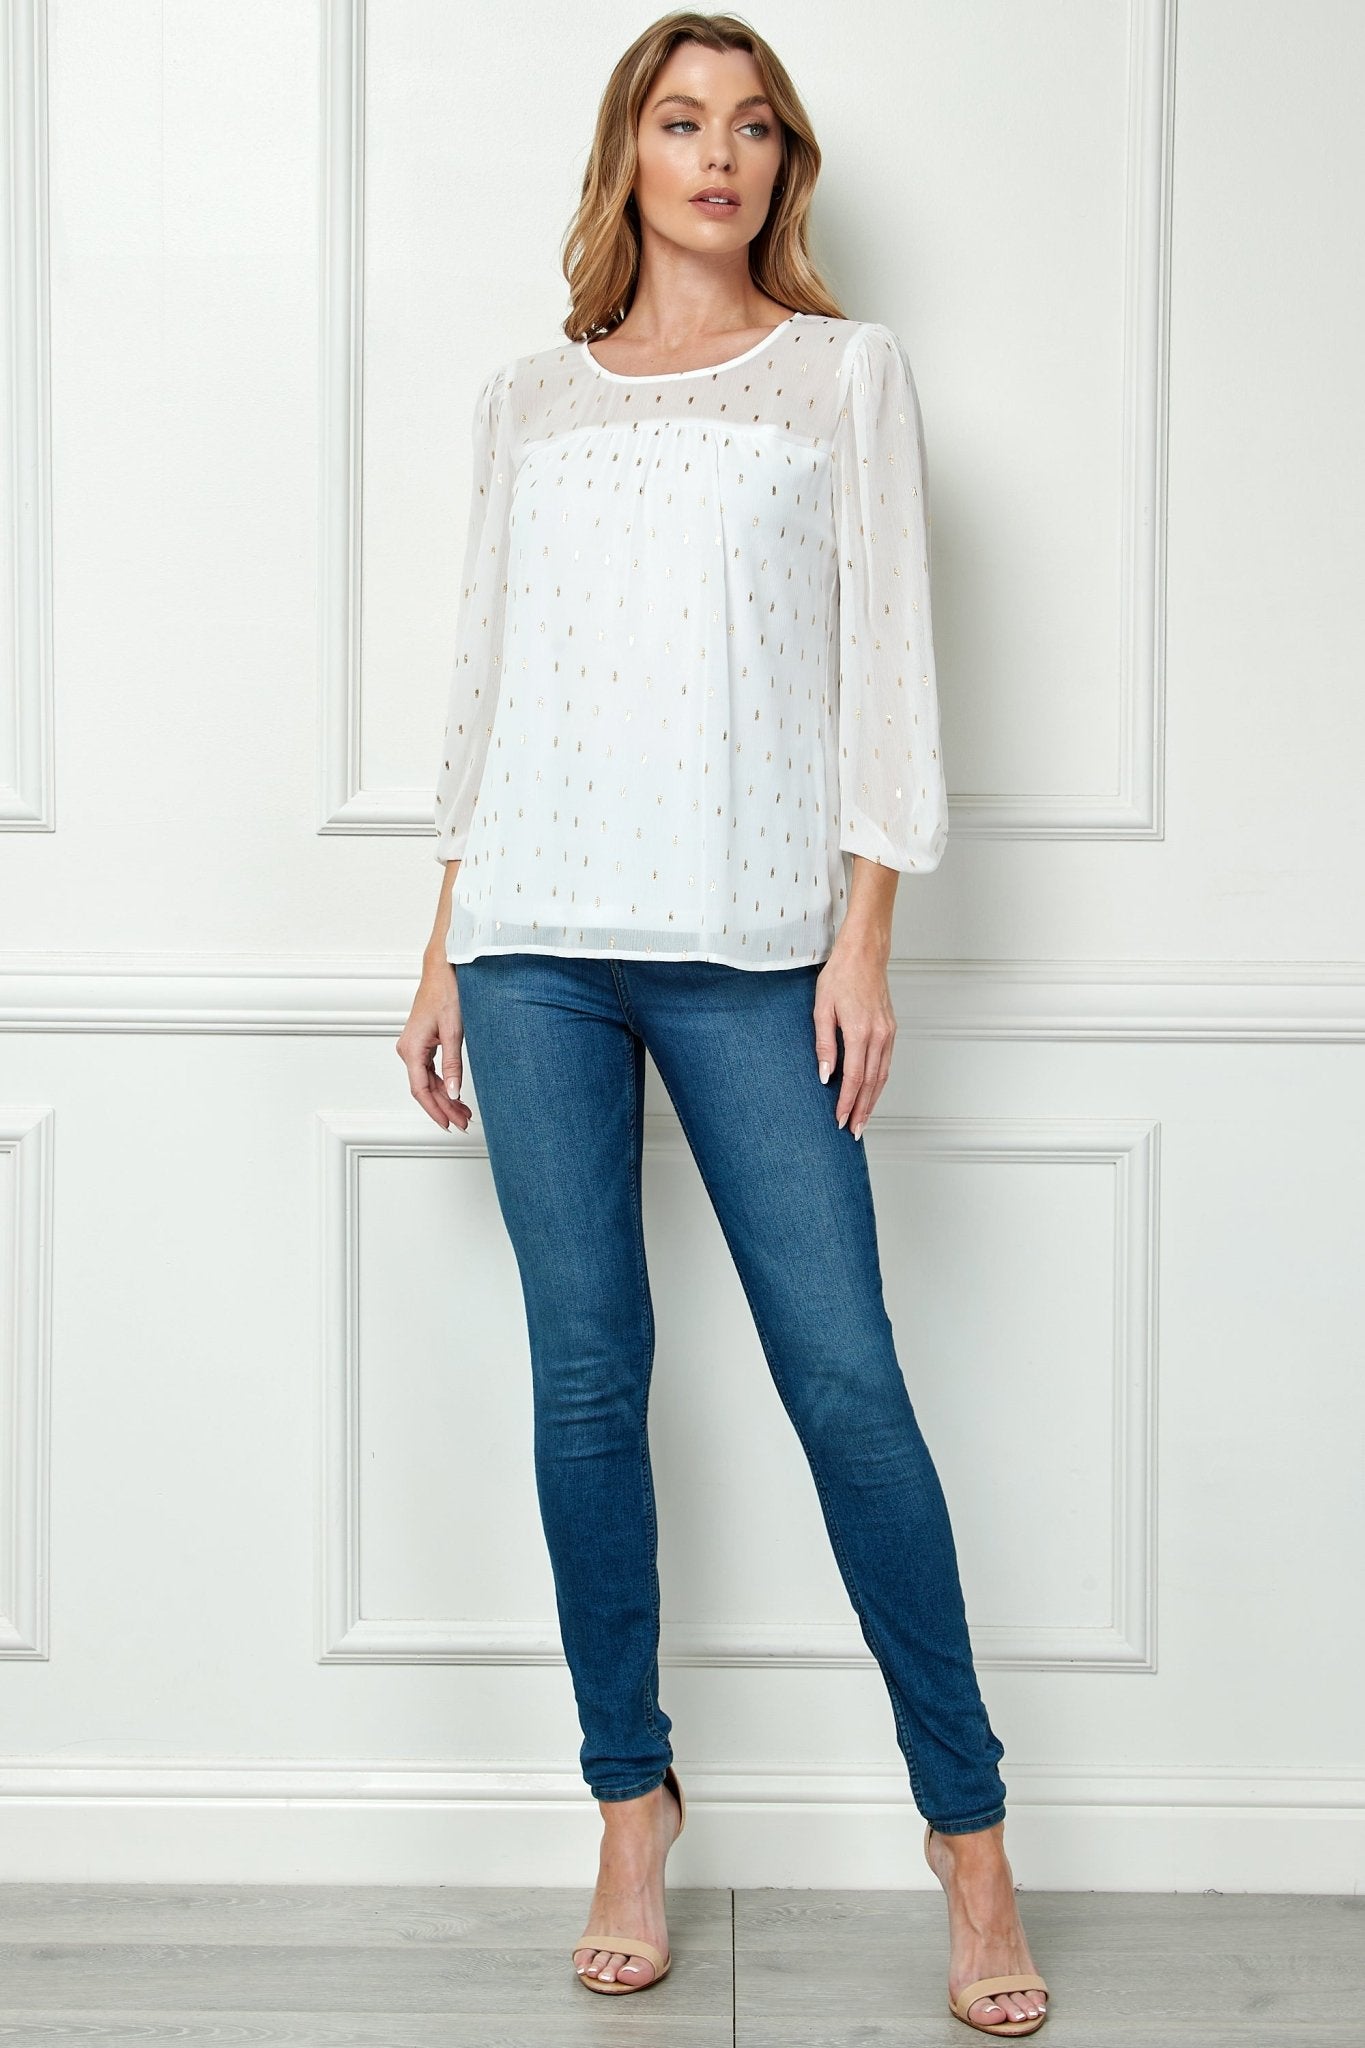 Sara Michelle Ivory & Gold 3/4 Knot Sleeve Scoop Neck Lined Blouse - DressbarnShirts & Blouses